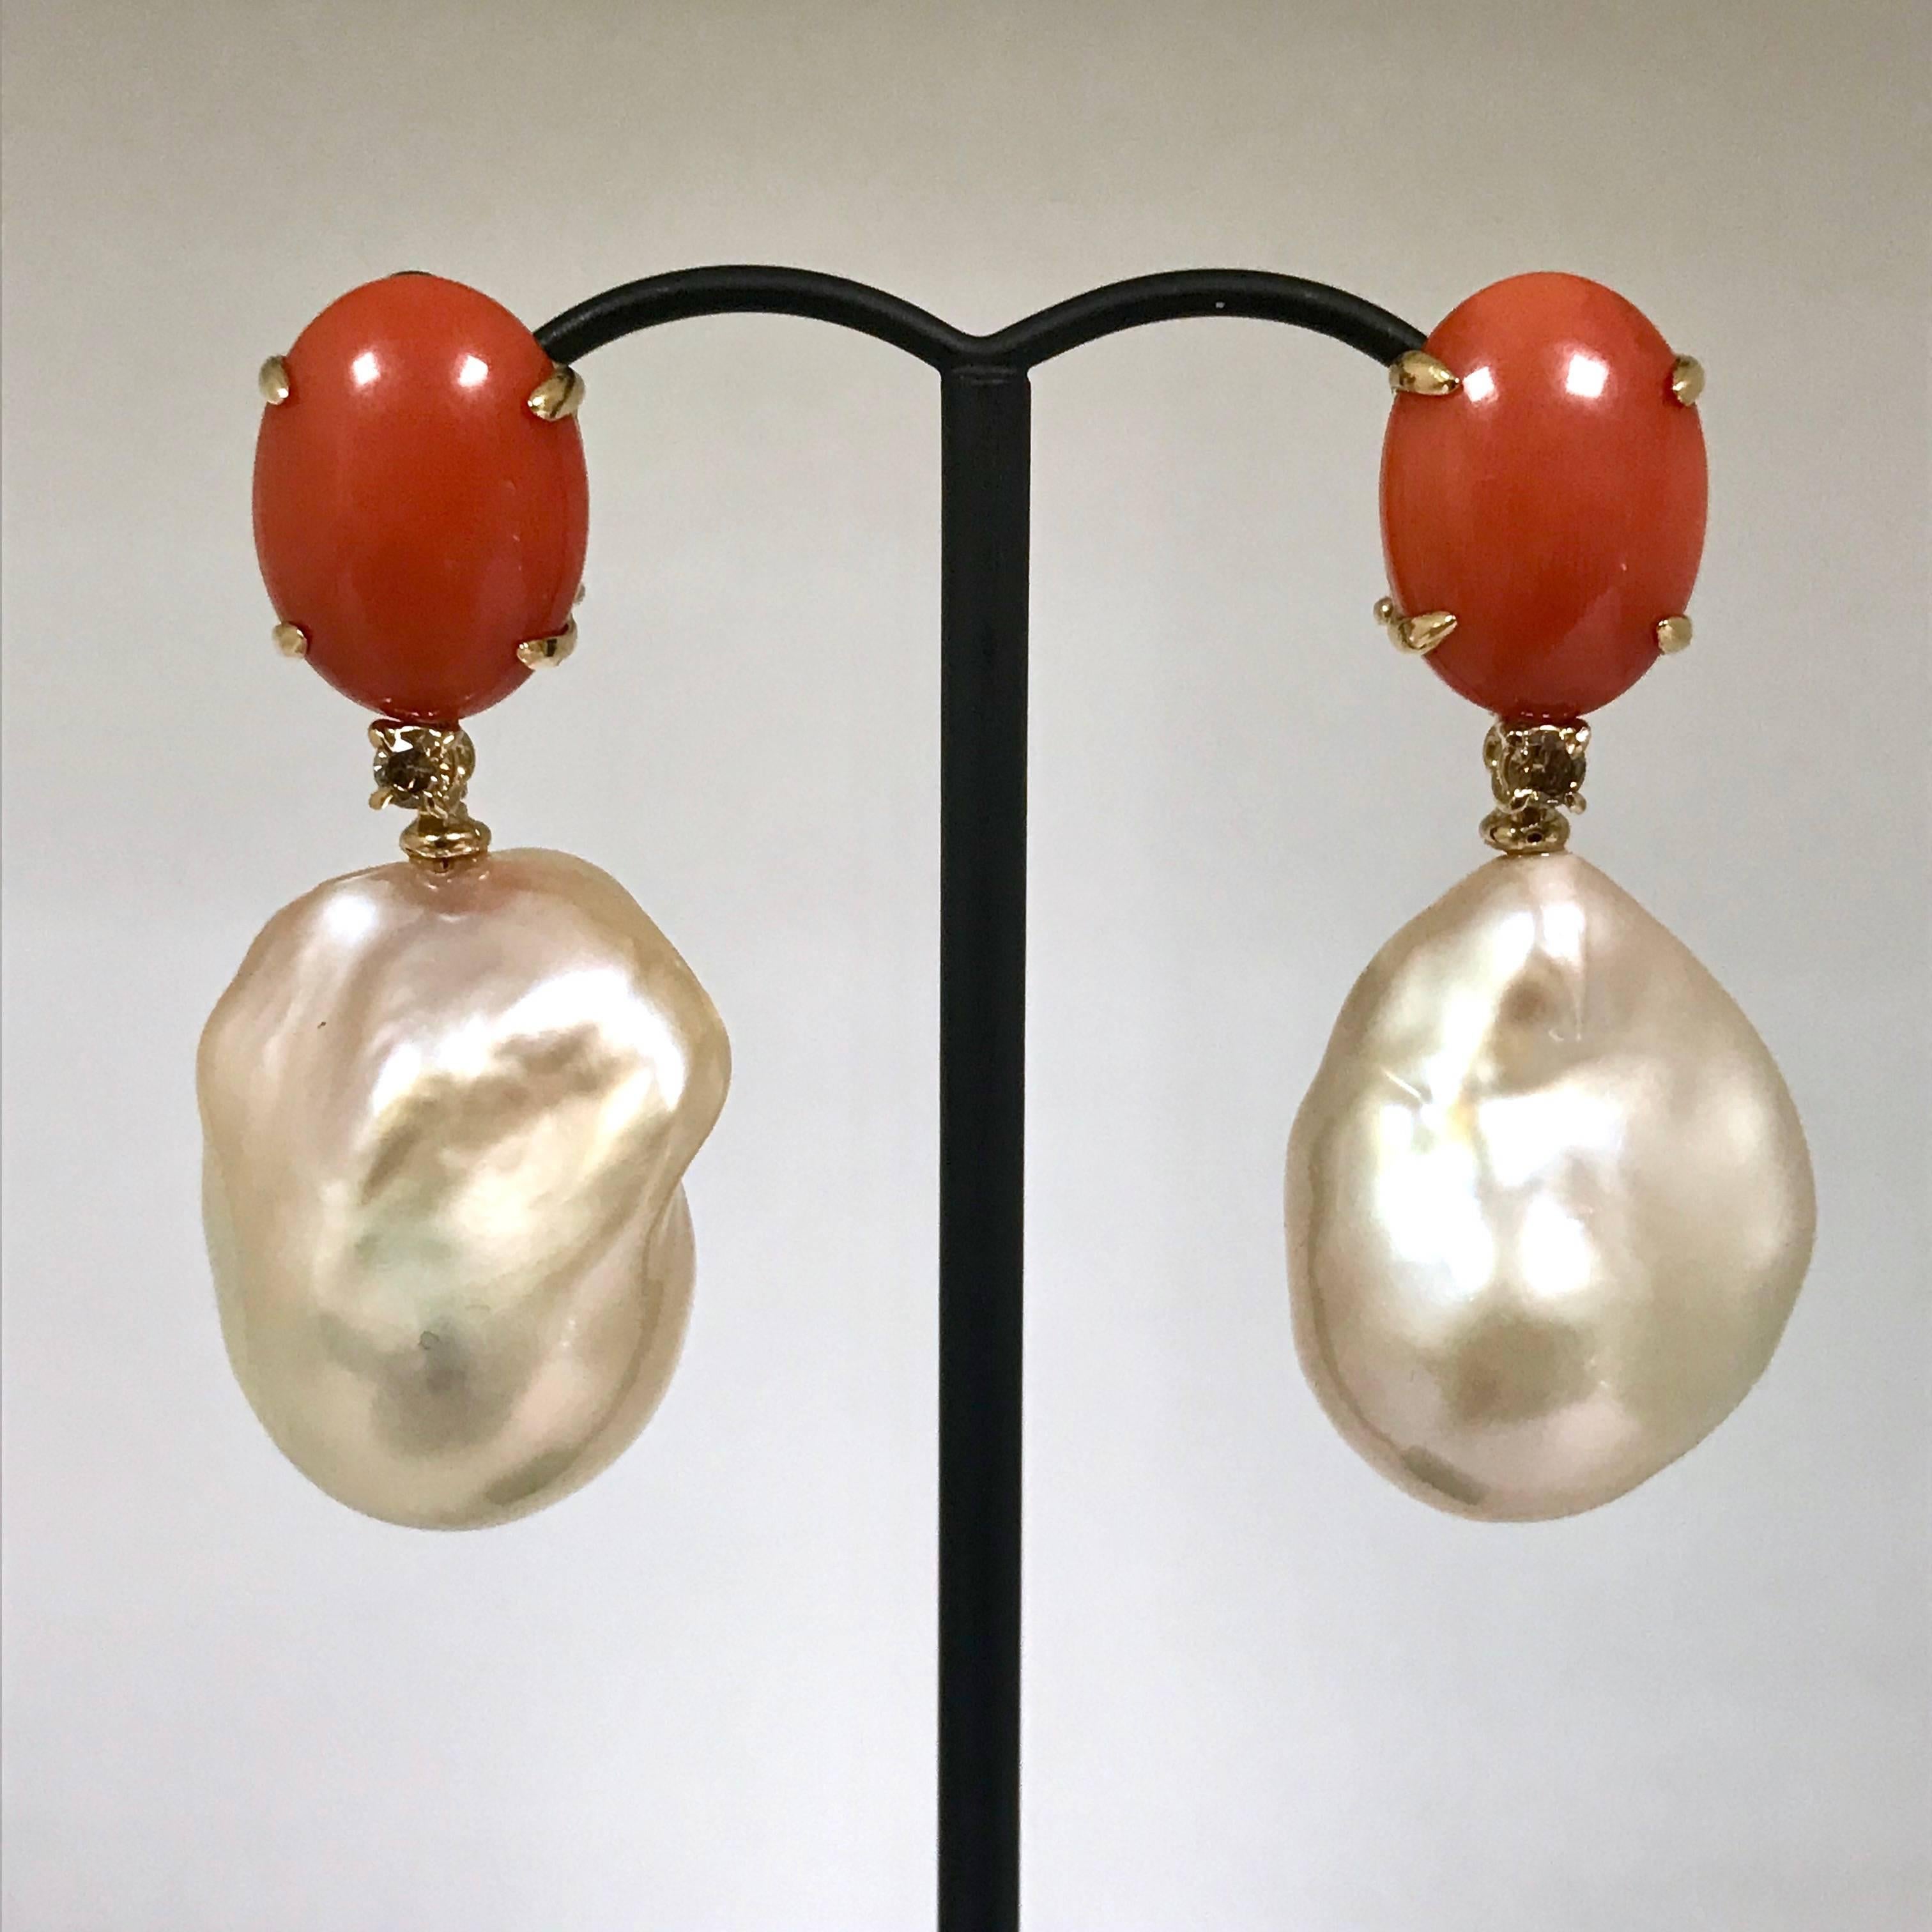 Baroque Pearls Coral and Diamonds Yellow Gold Earrings.
Baroque Pearls
Coral
Diamonds Brilliants FU 0,016 Carat
Yellow Gold 18 Carat